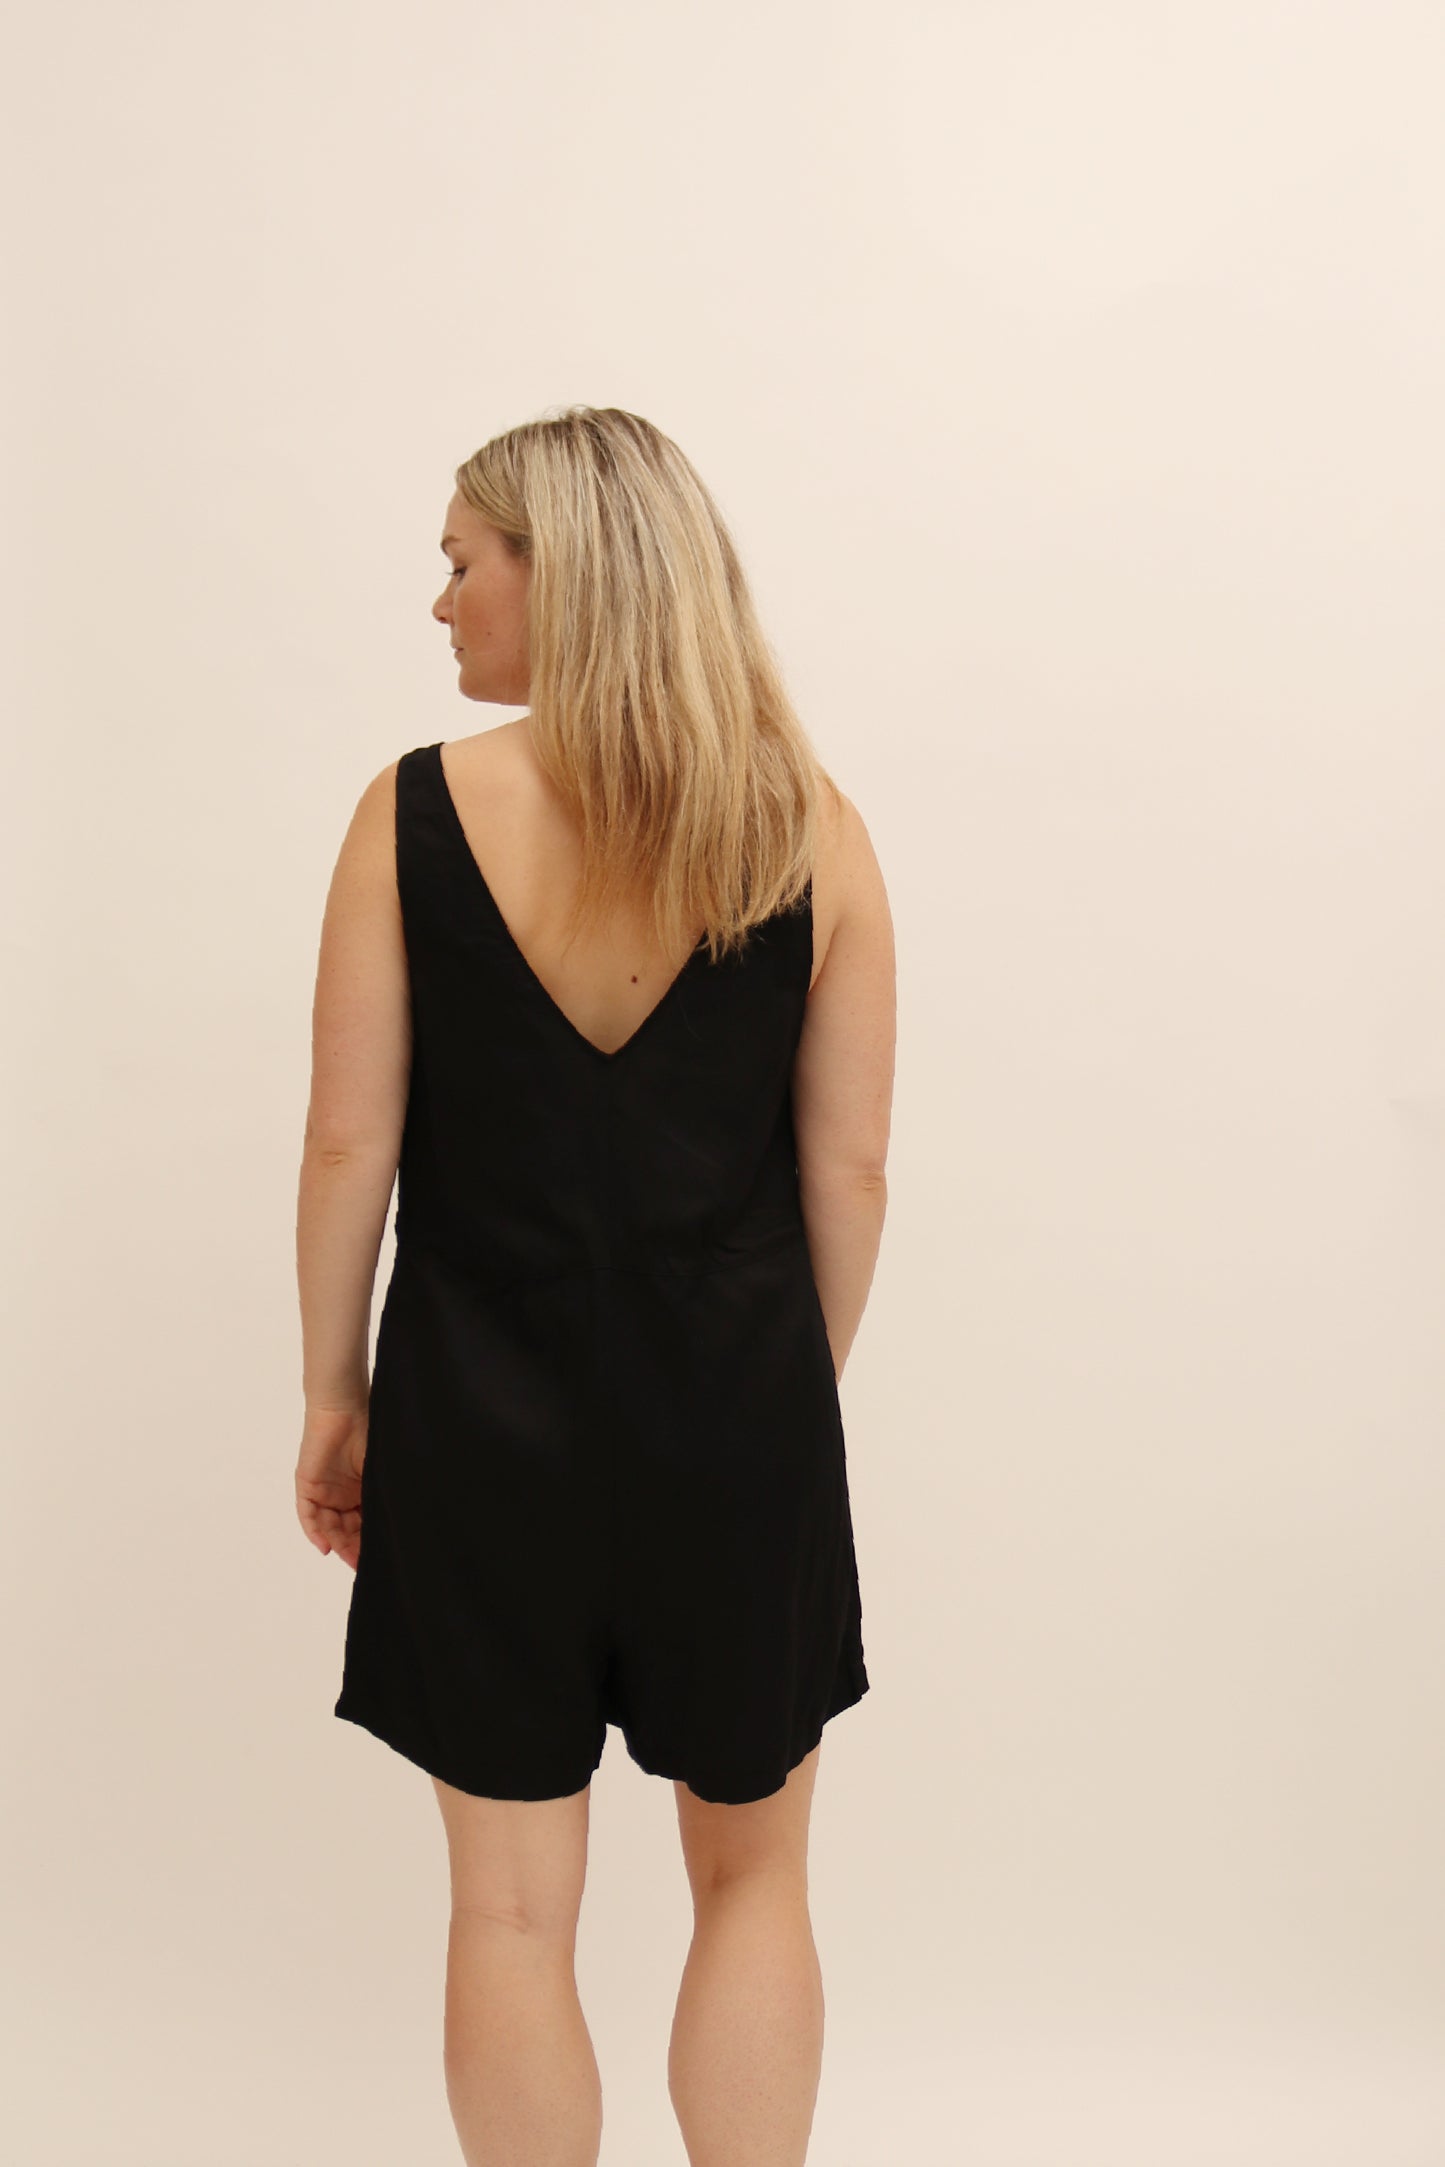 OTHER STORIES LINEN PLAYSUIT